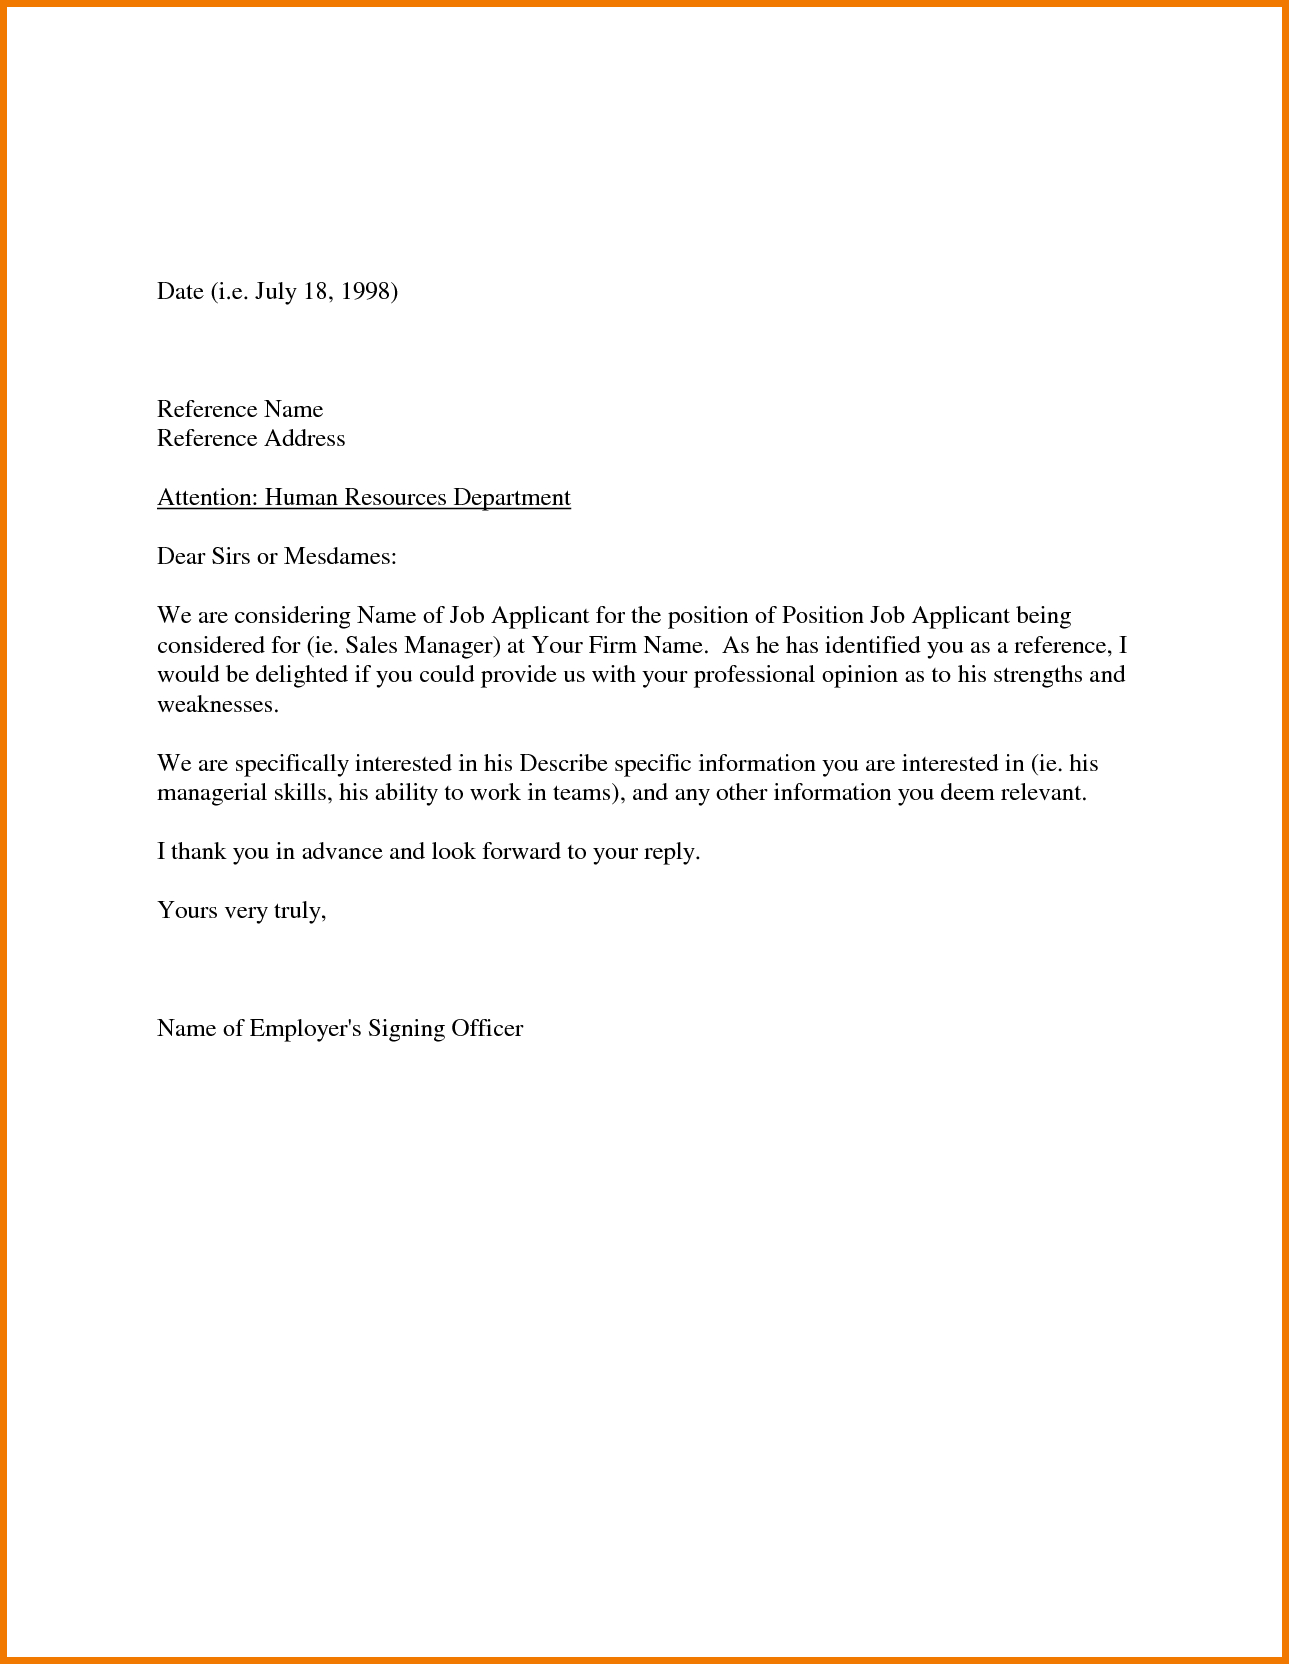 mortgage-employer-reference-letter-invitation-template-ideas